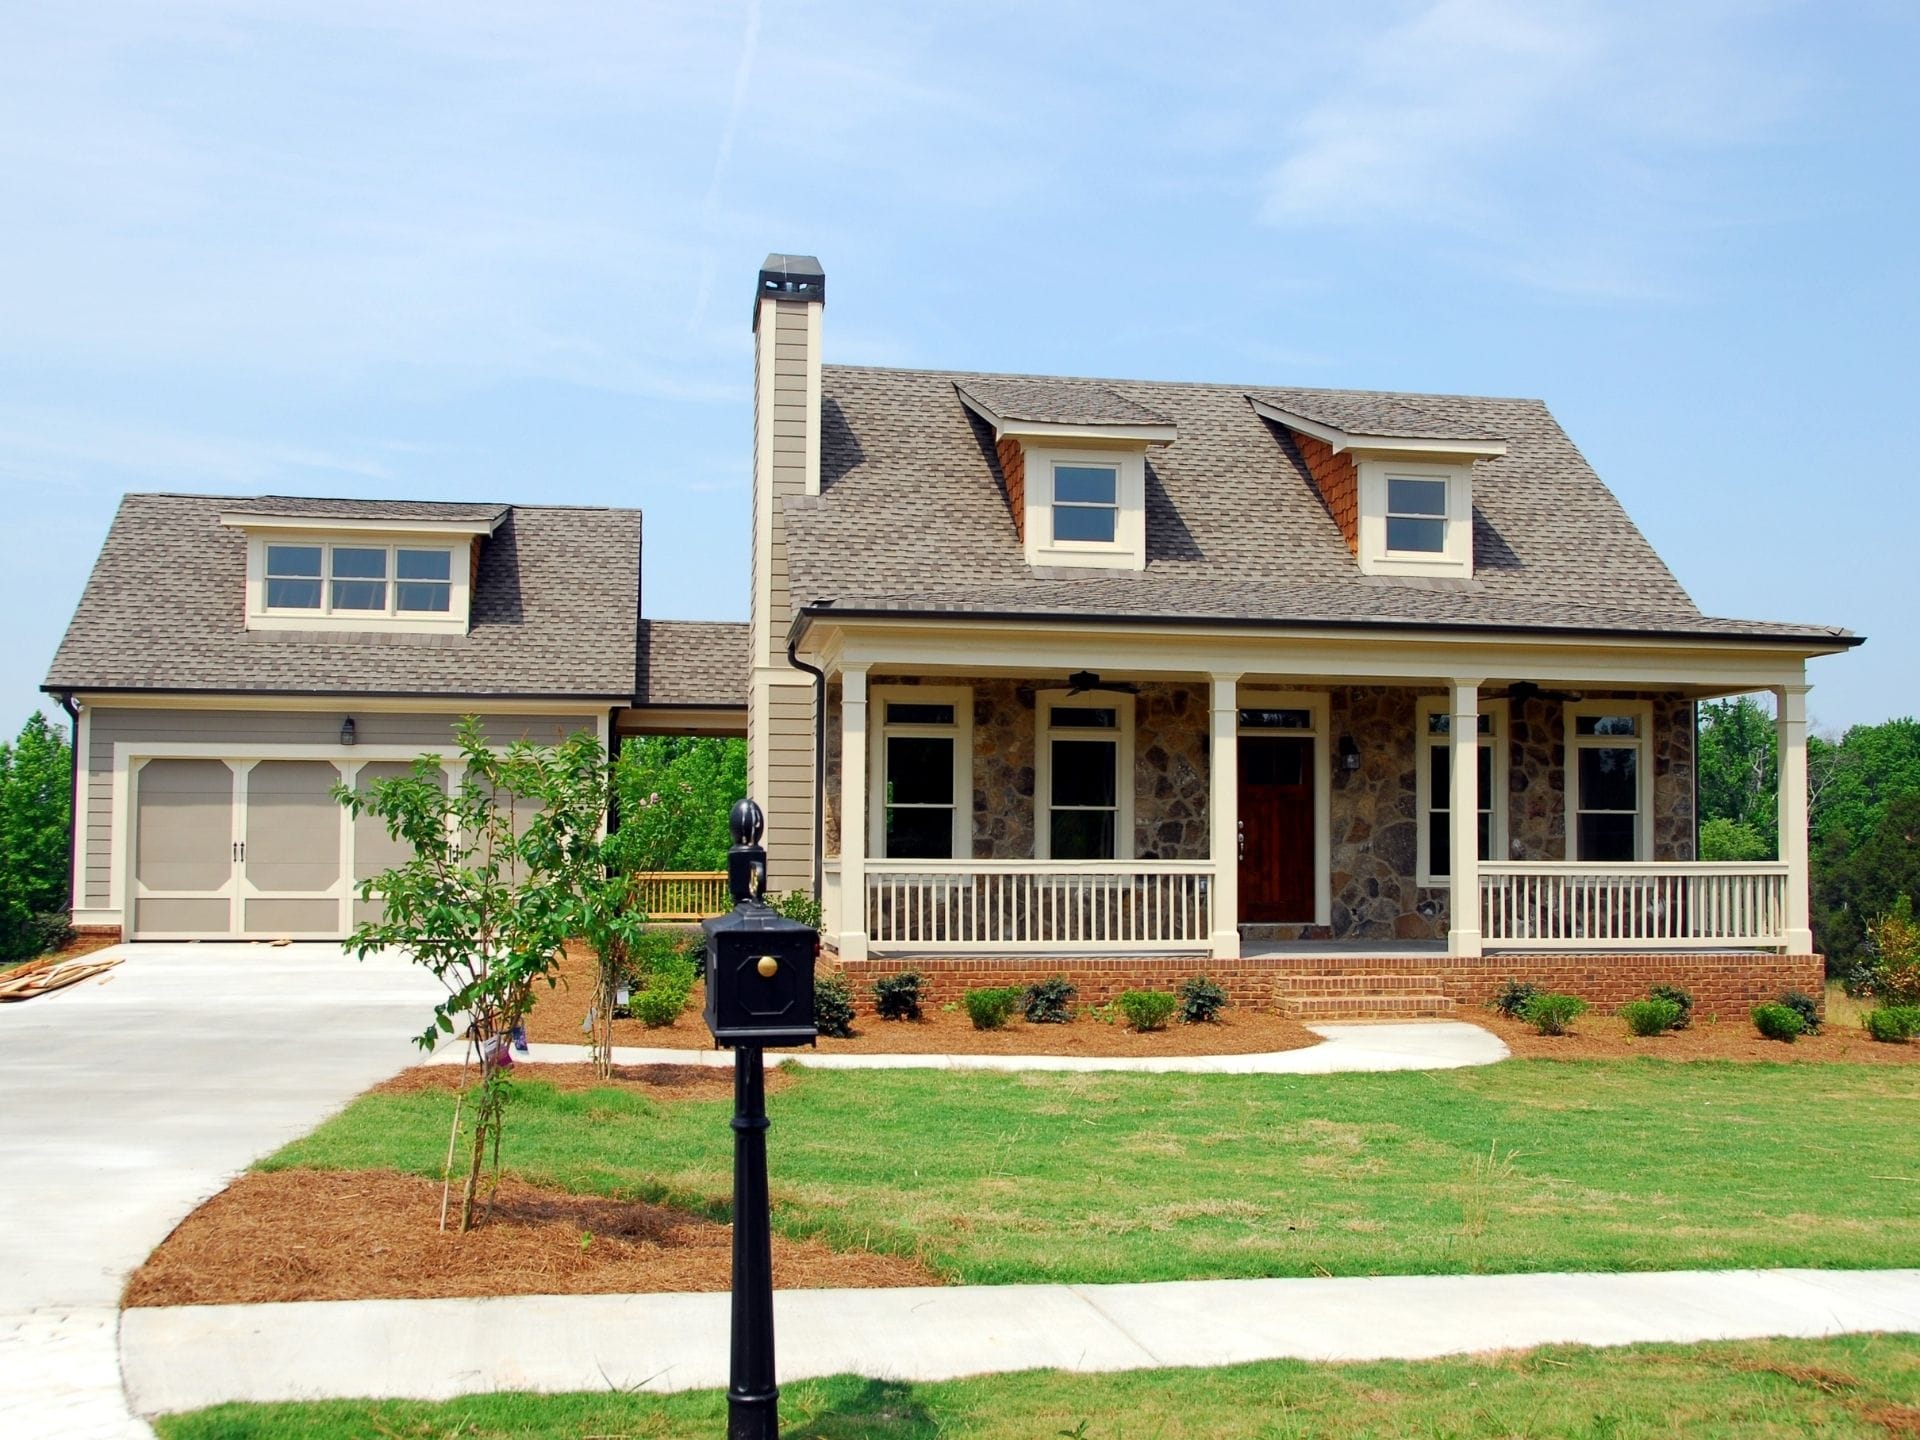 Preferred local roofing contractor in DFW, TX